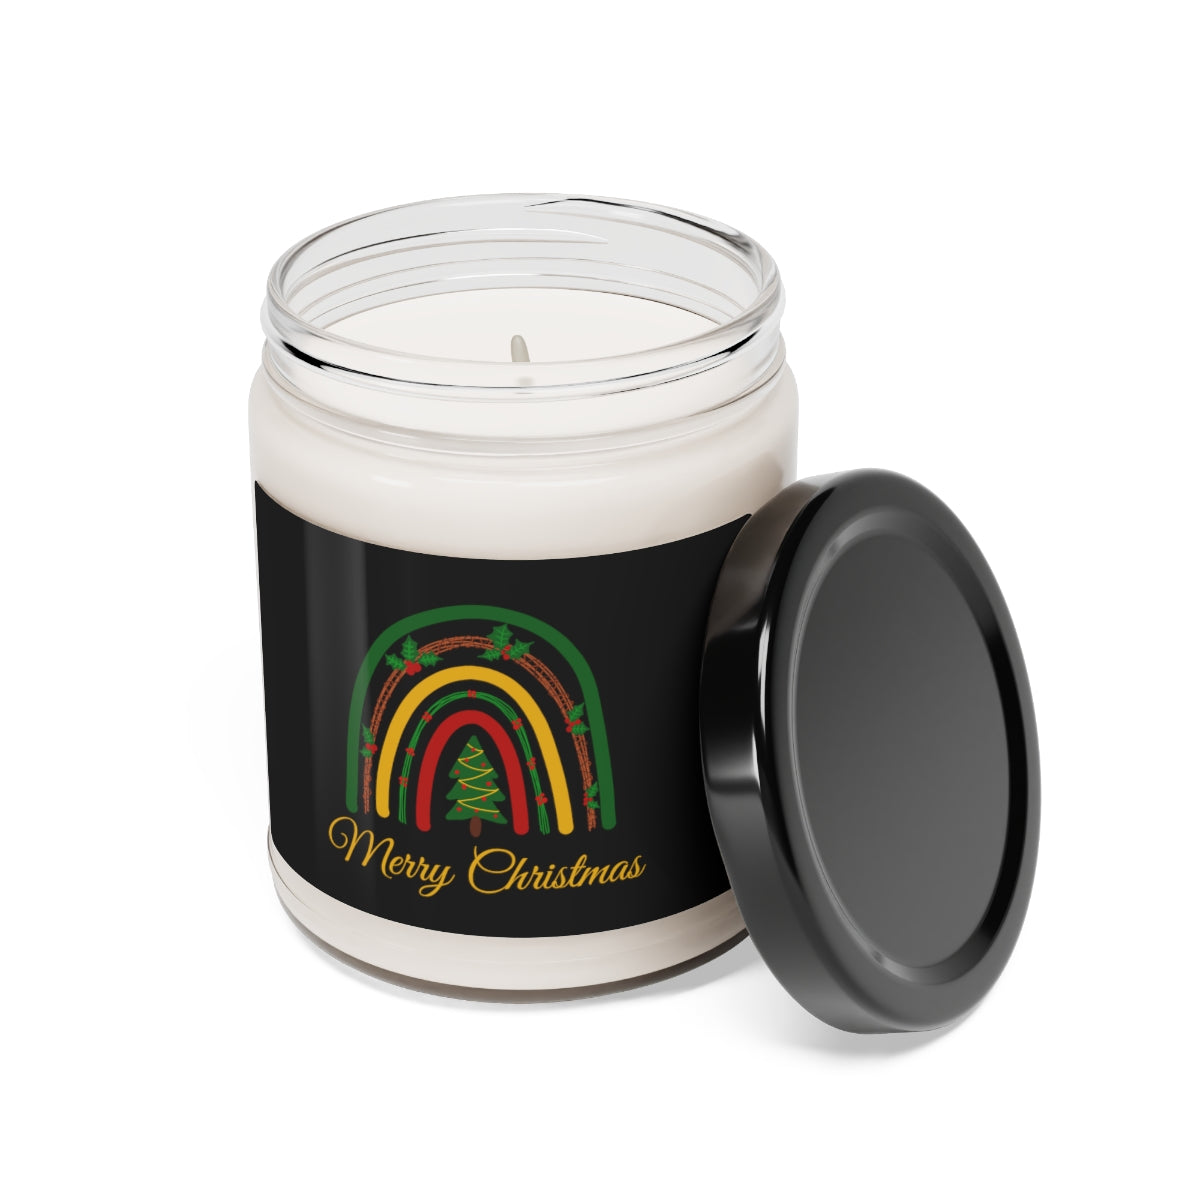 Merry Christmas Scented Soy Candle, 9oz